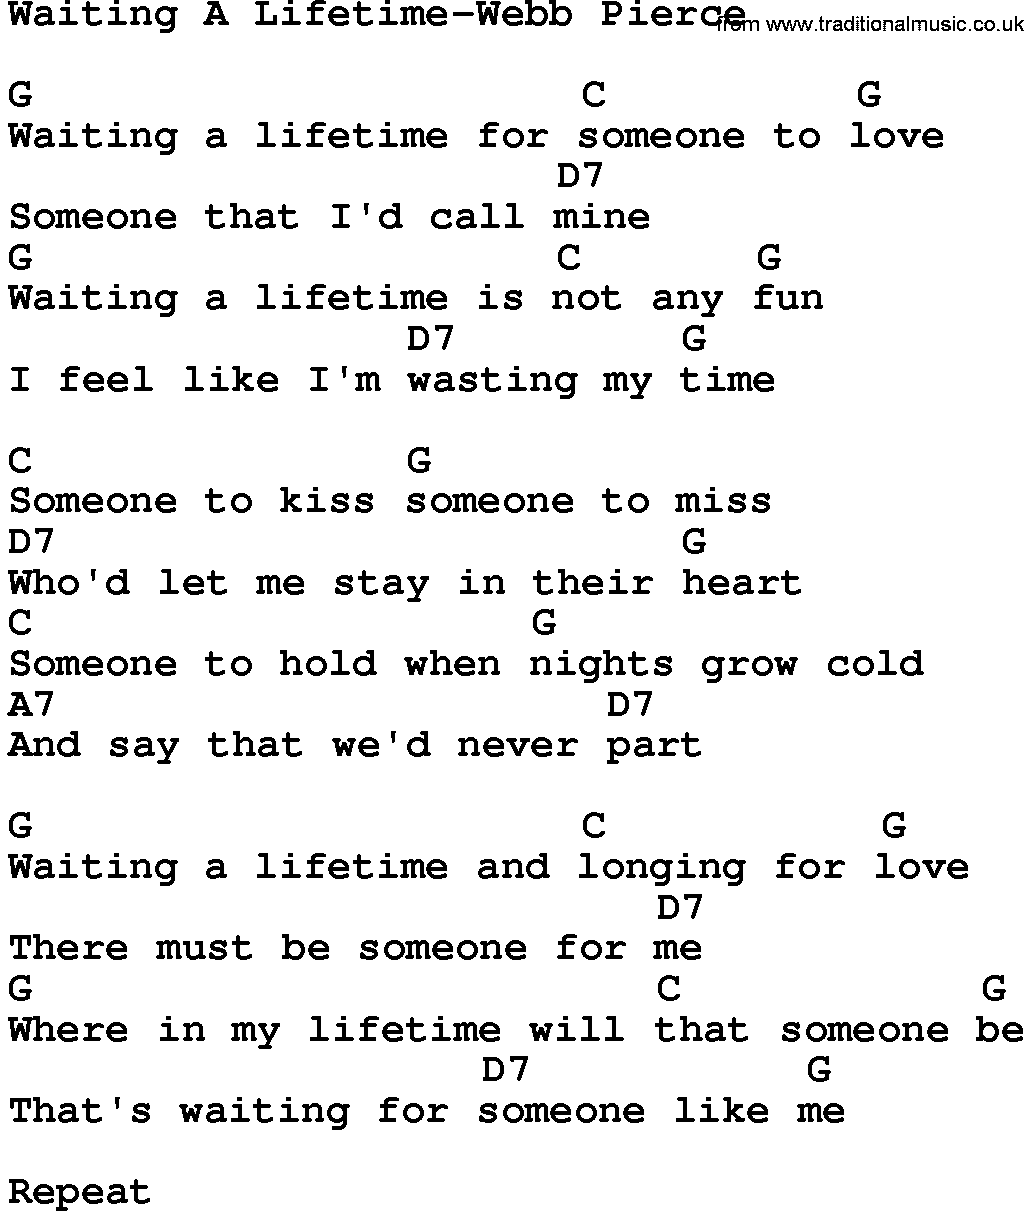 Country music song: Waiting A Lifetime-Webb Pierce lyrics and chords